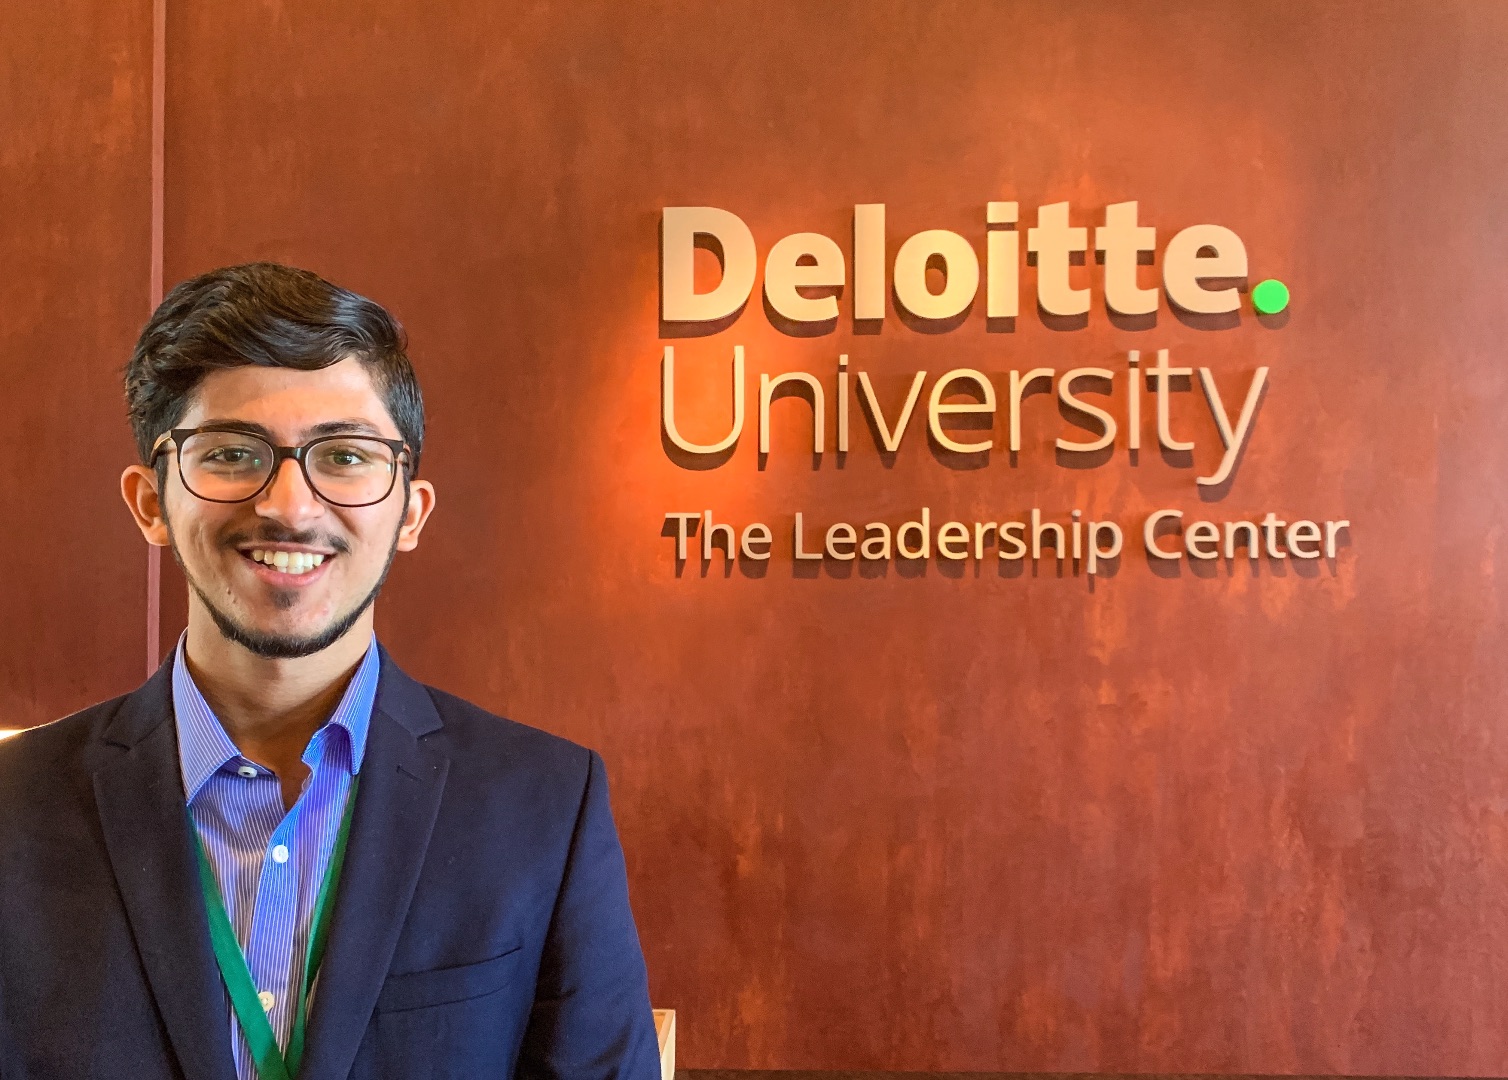 Man posing next to sign that says Deloitte University The Leadership Center